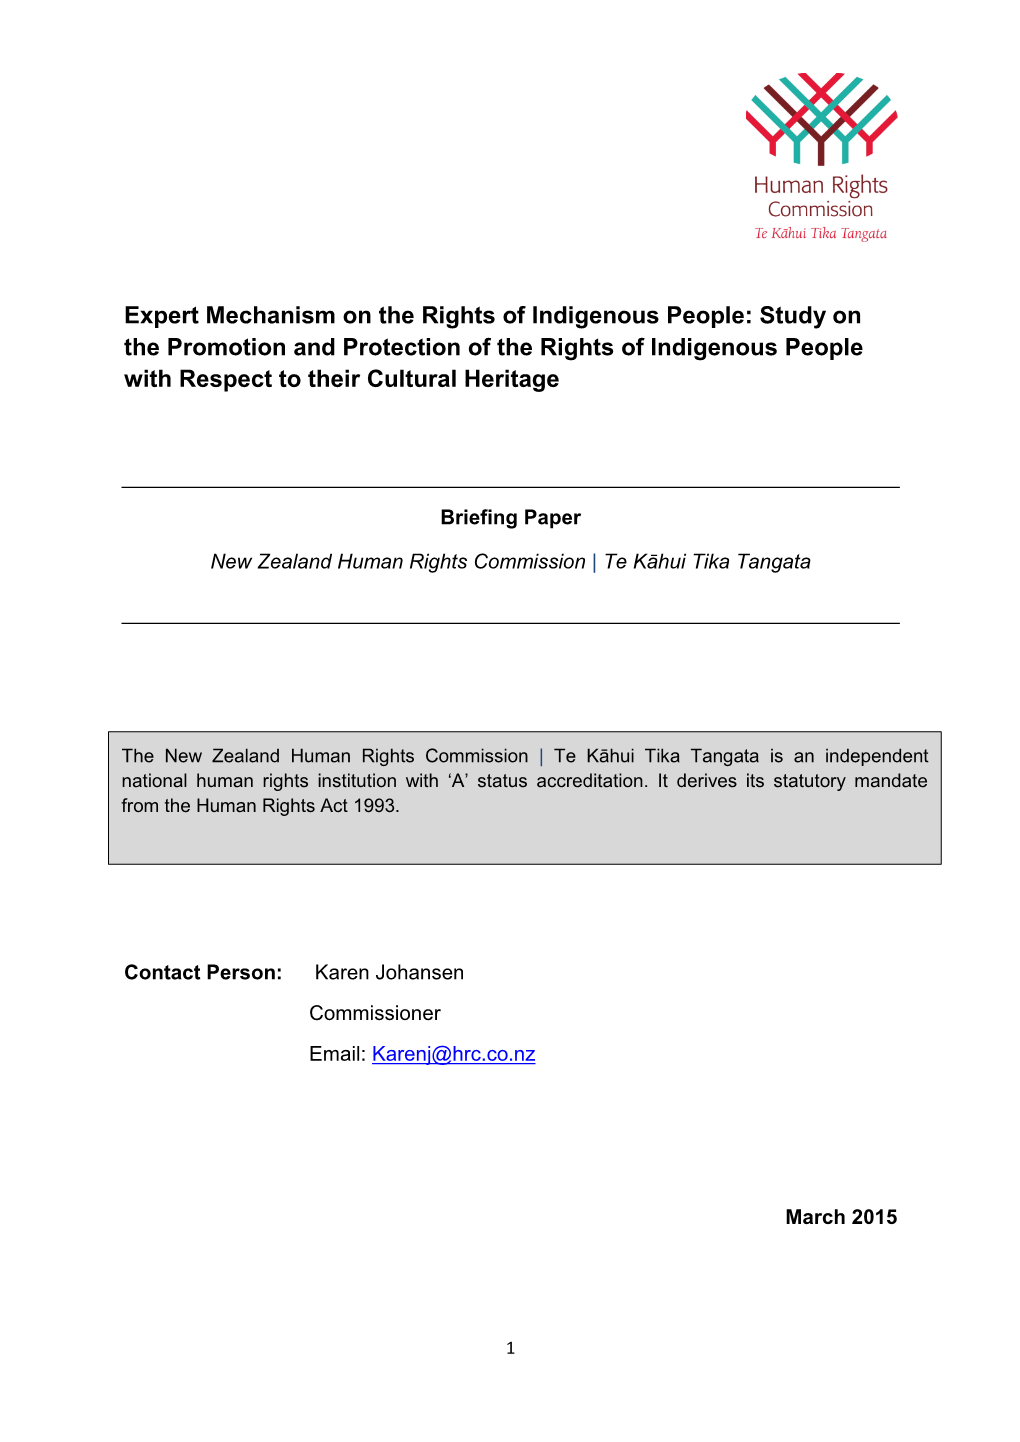 Expert Mechanism on the Rights of Indigenous People: Study on the Promotion and Protection of the Rights of Indigenous People with Respect to Their Cultural Heritage